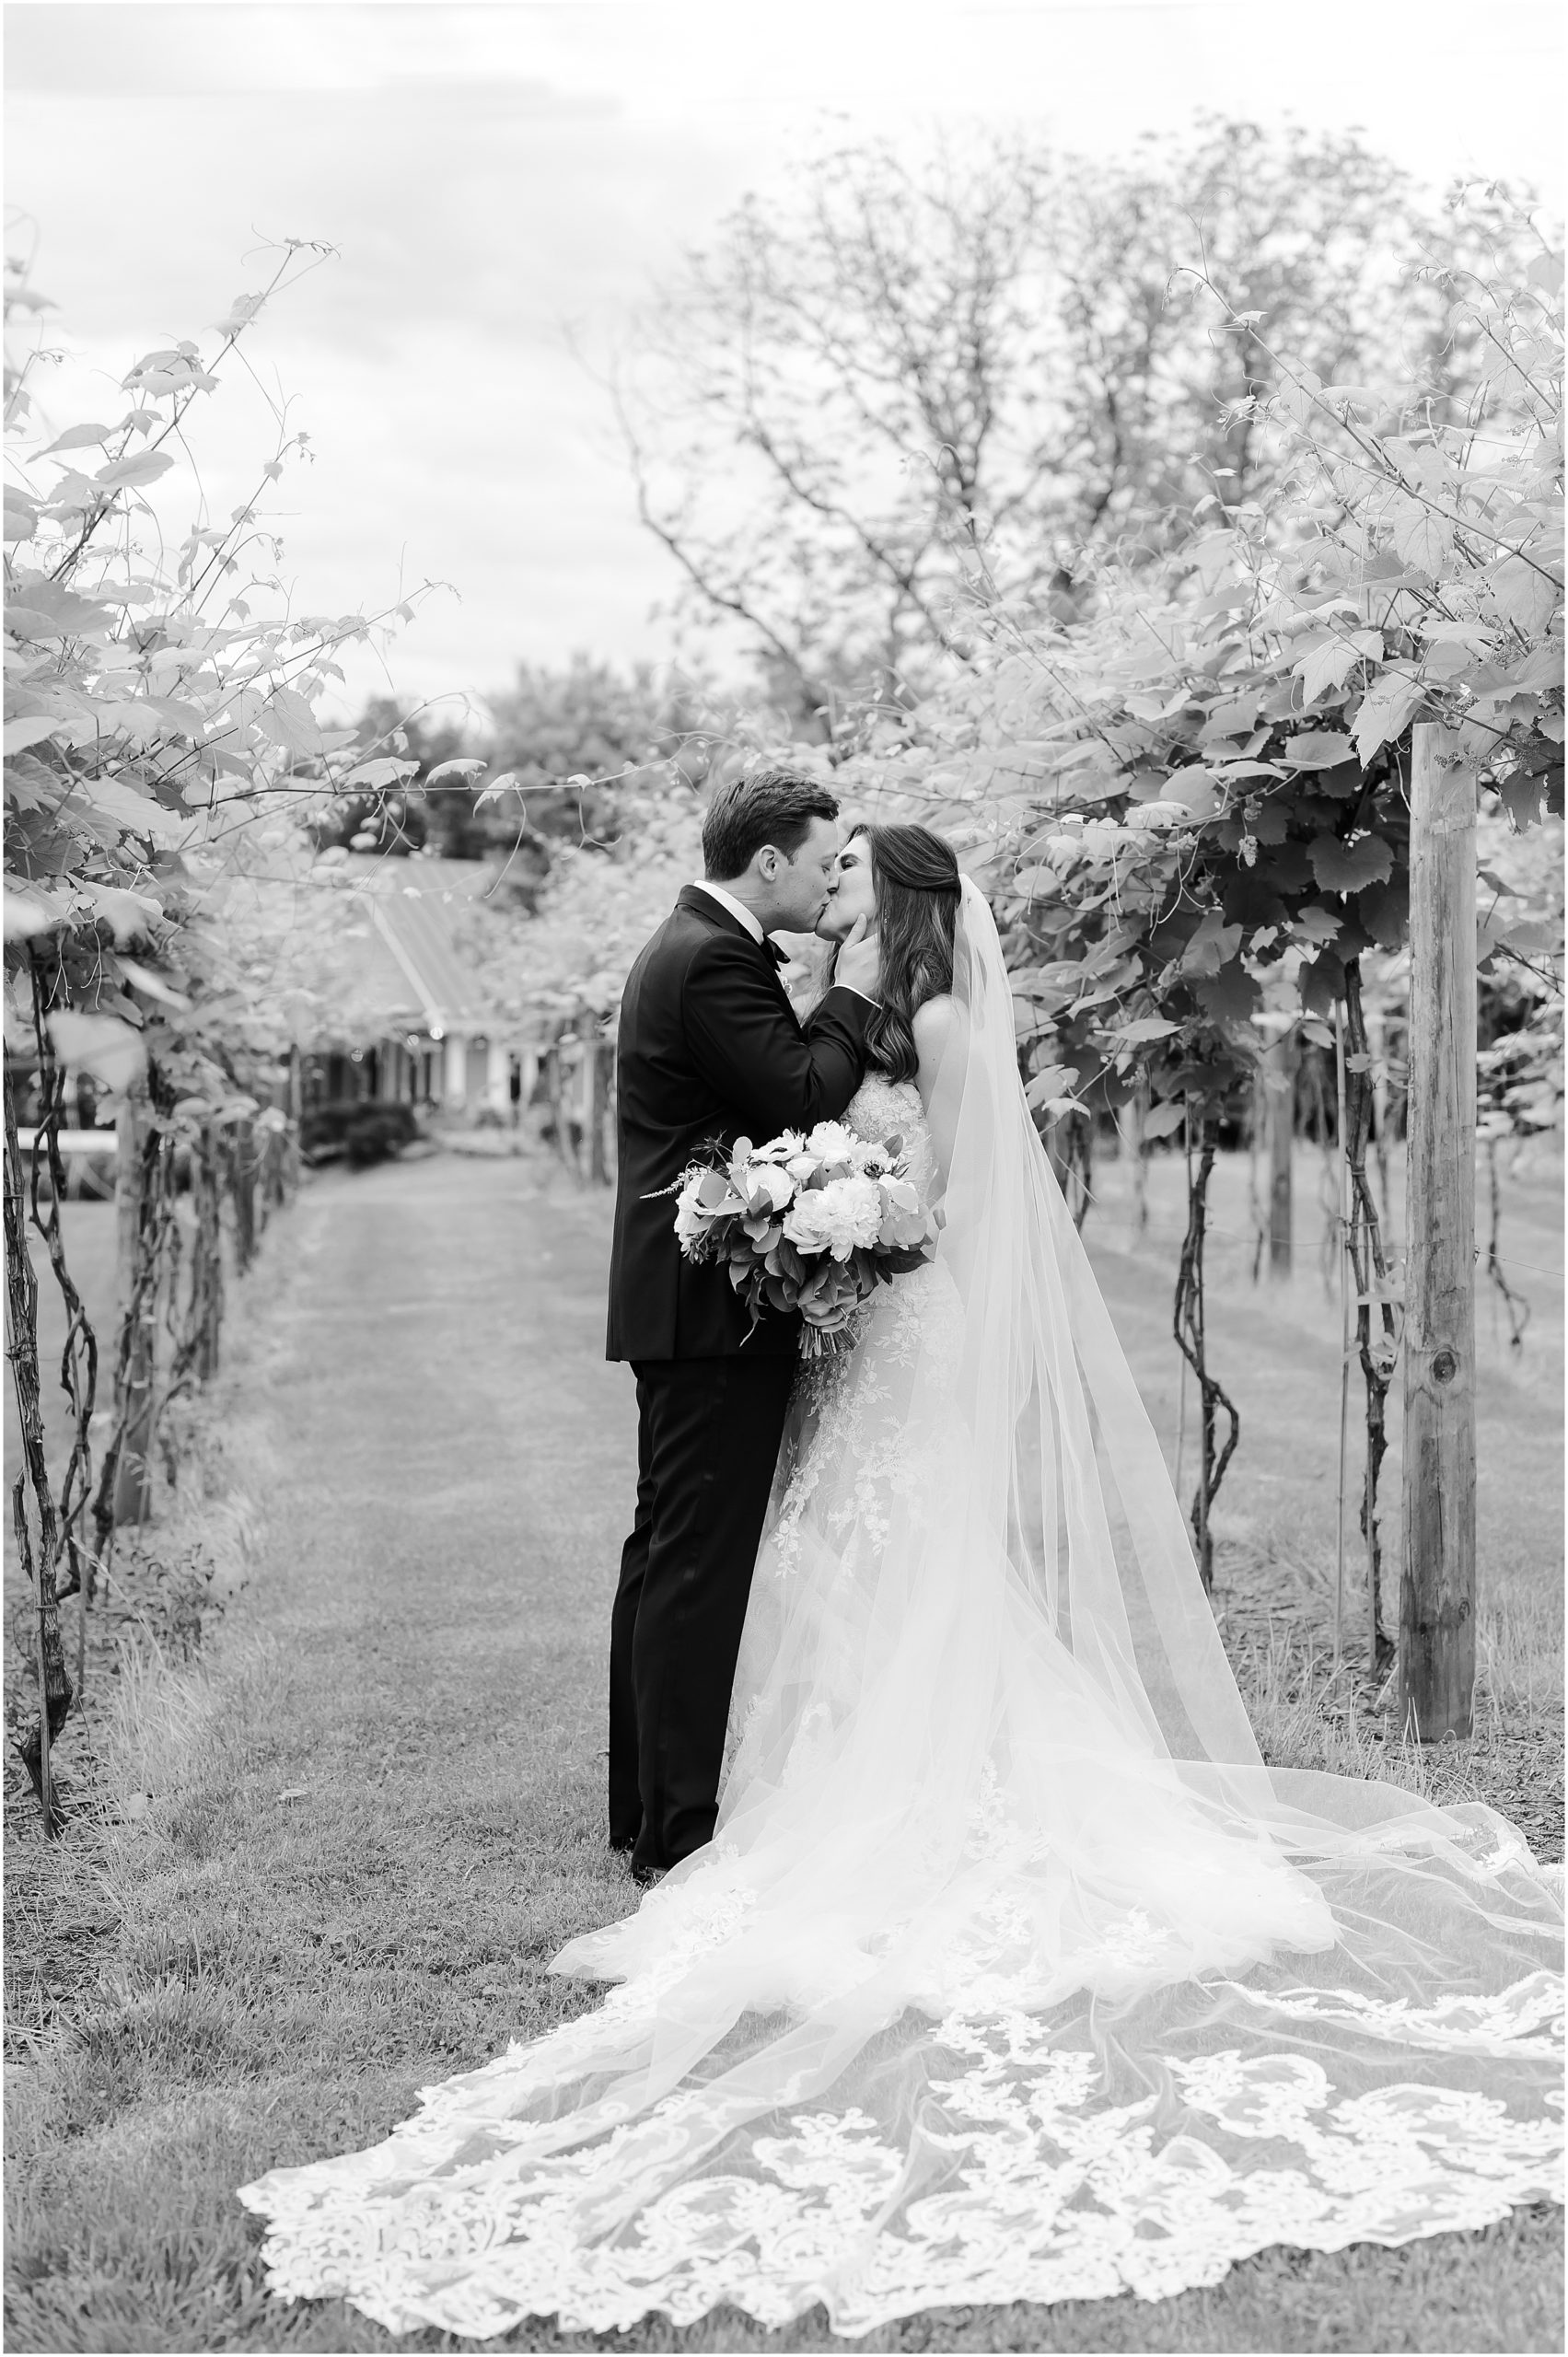 Bride and groom share a kiss at their wedding at Fleetwood Farm Winery in Leesburg, VA